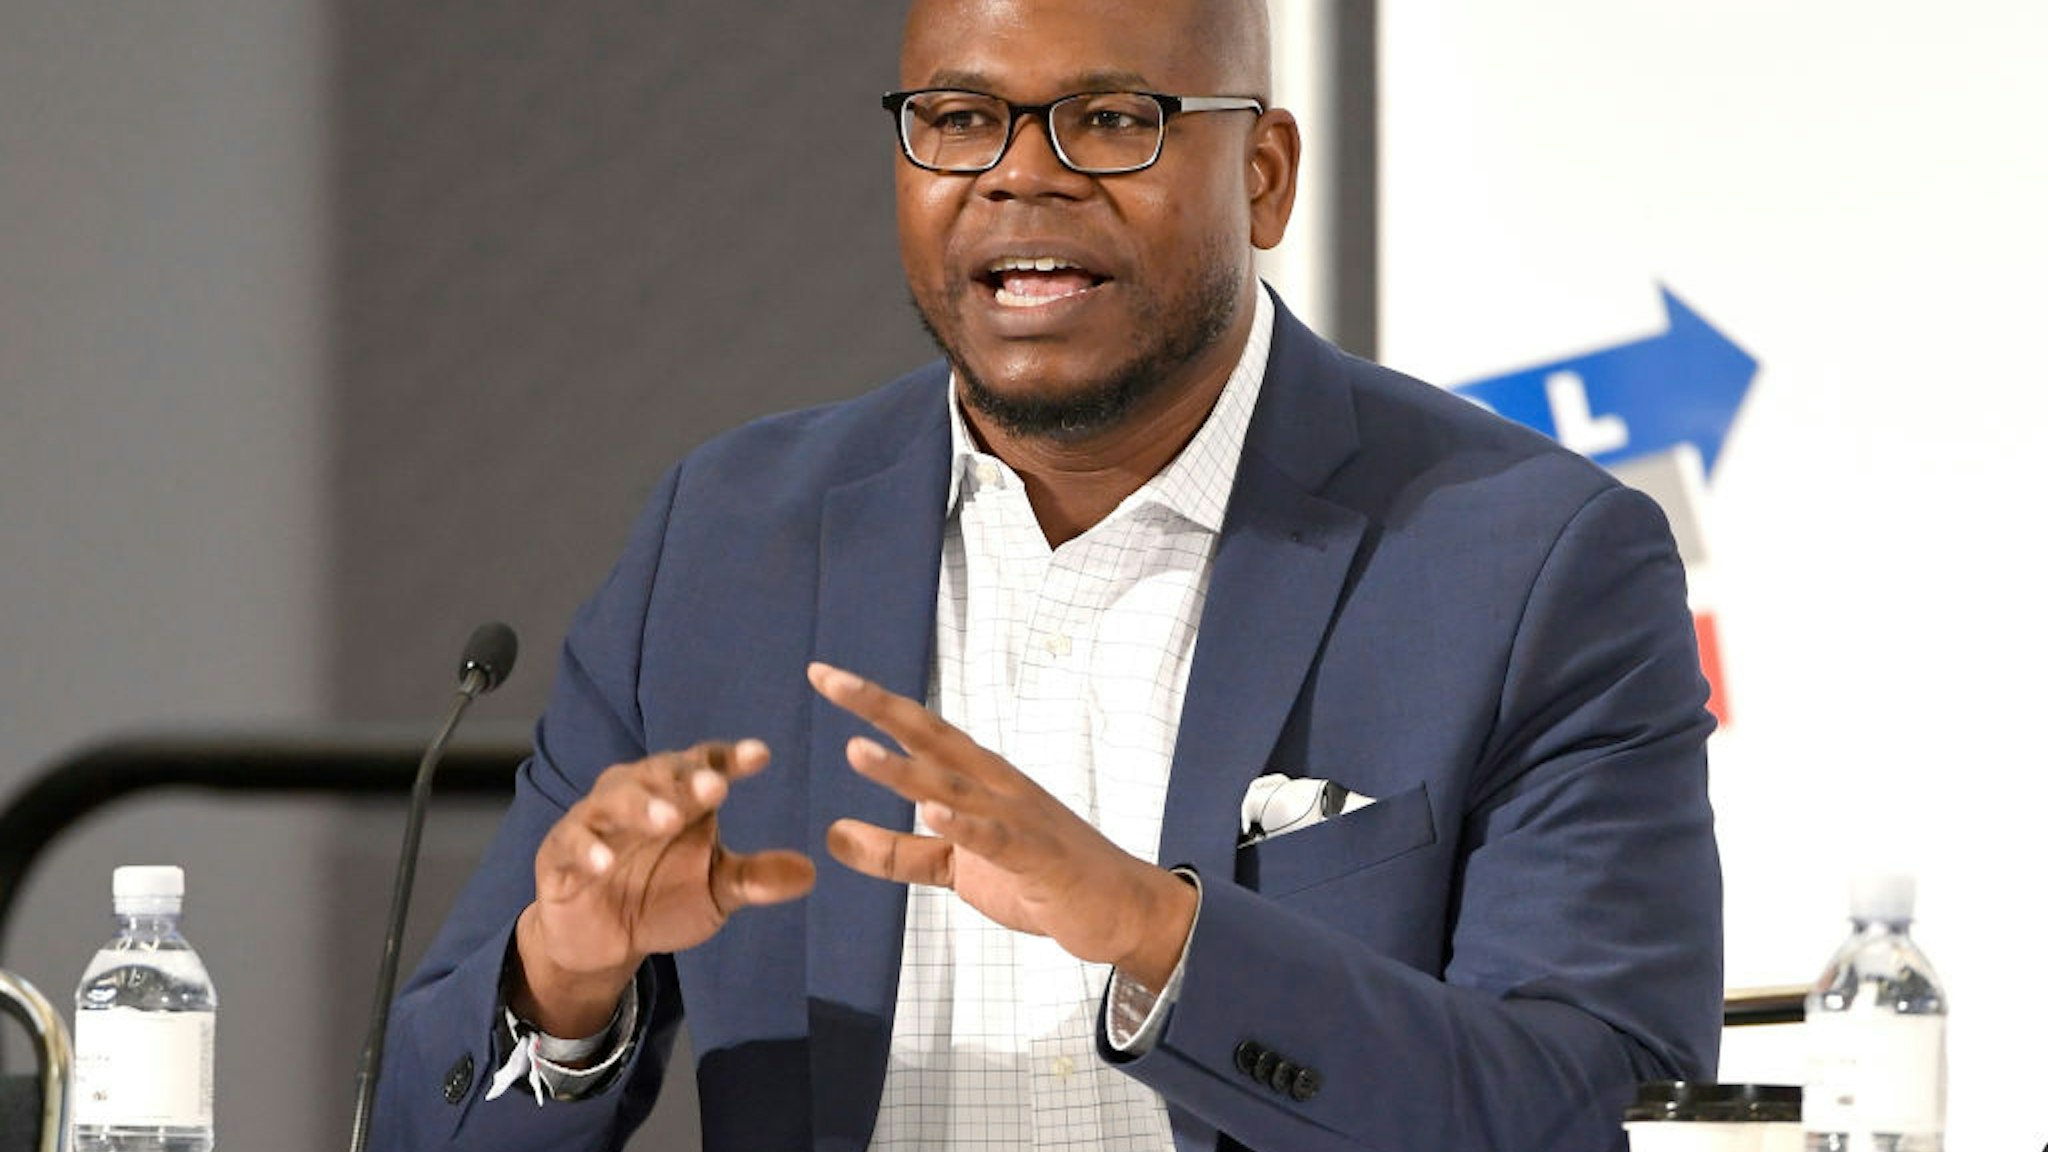 Jason Johnson speaks onstage Politicon 2018 at Los Angeles Convention Center on October 20, 2018 in Los Angeles, California